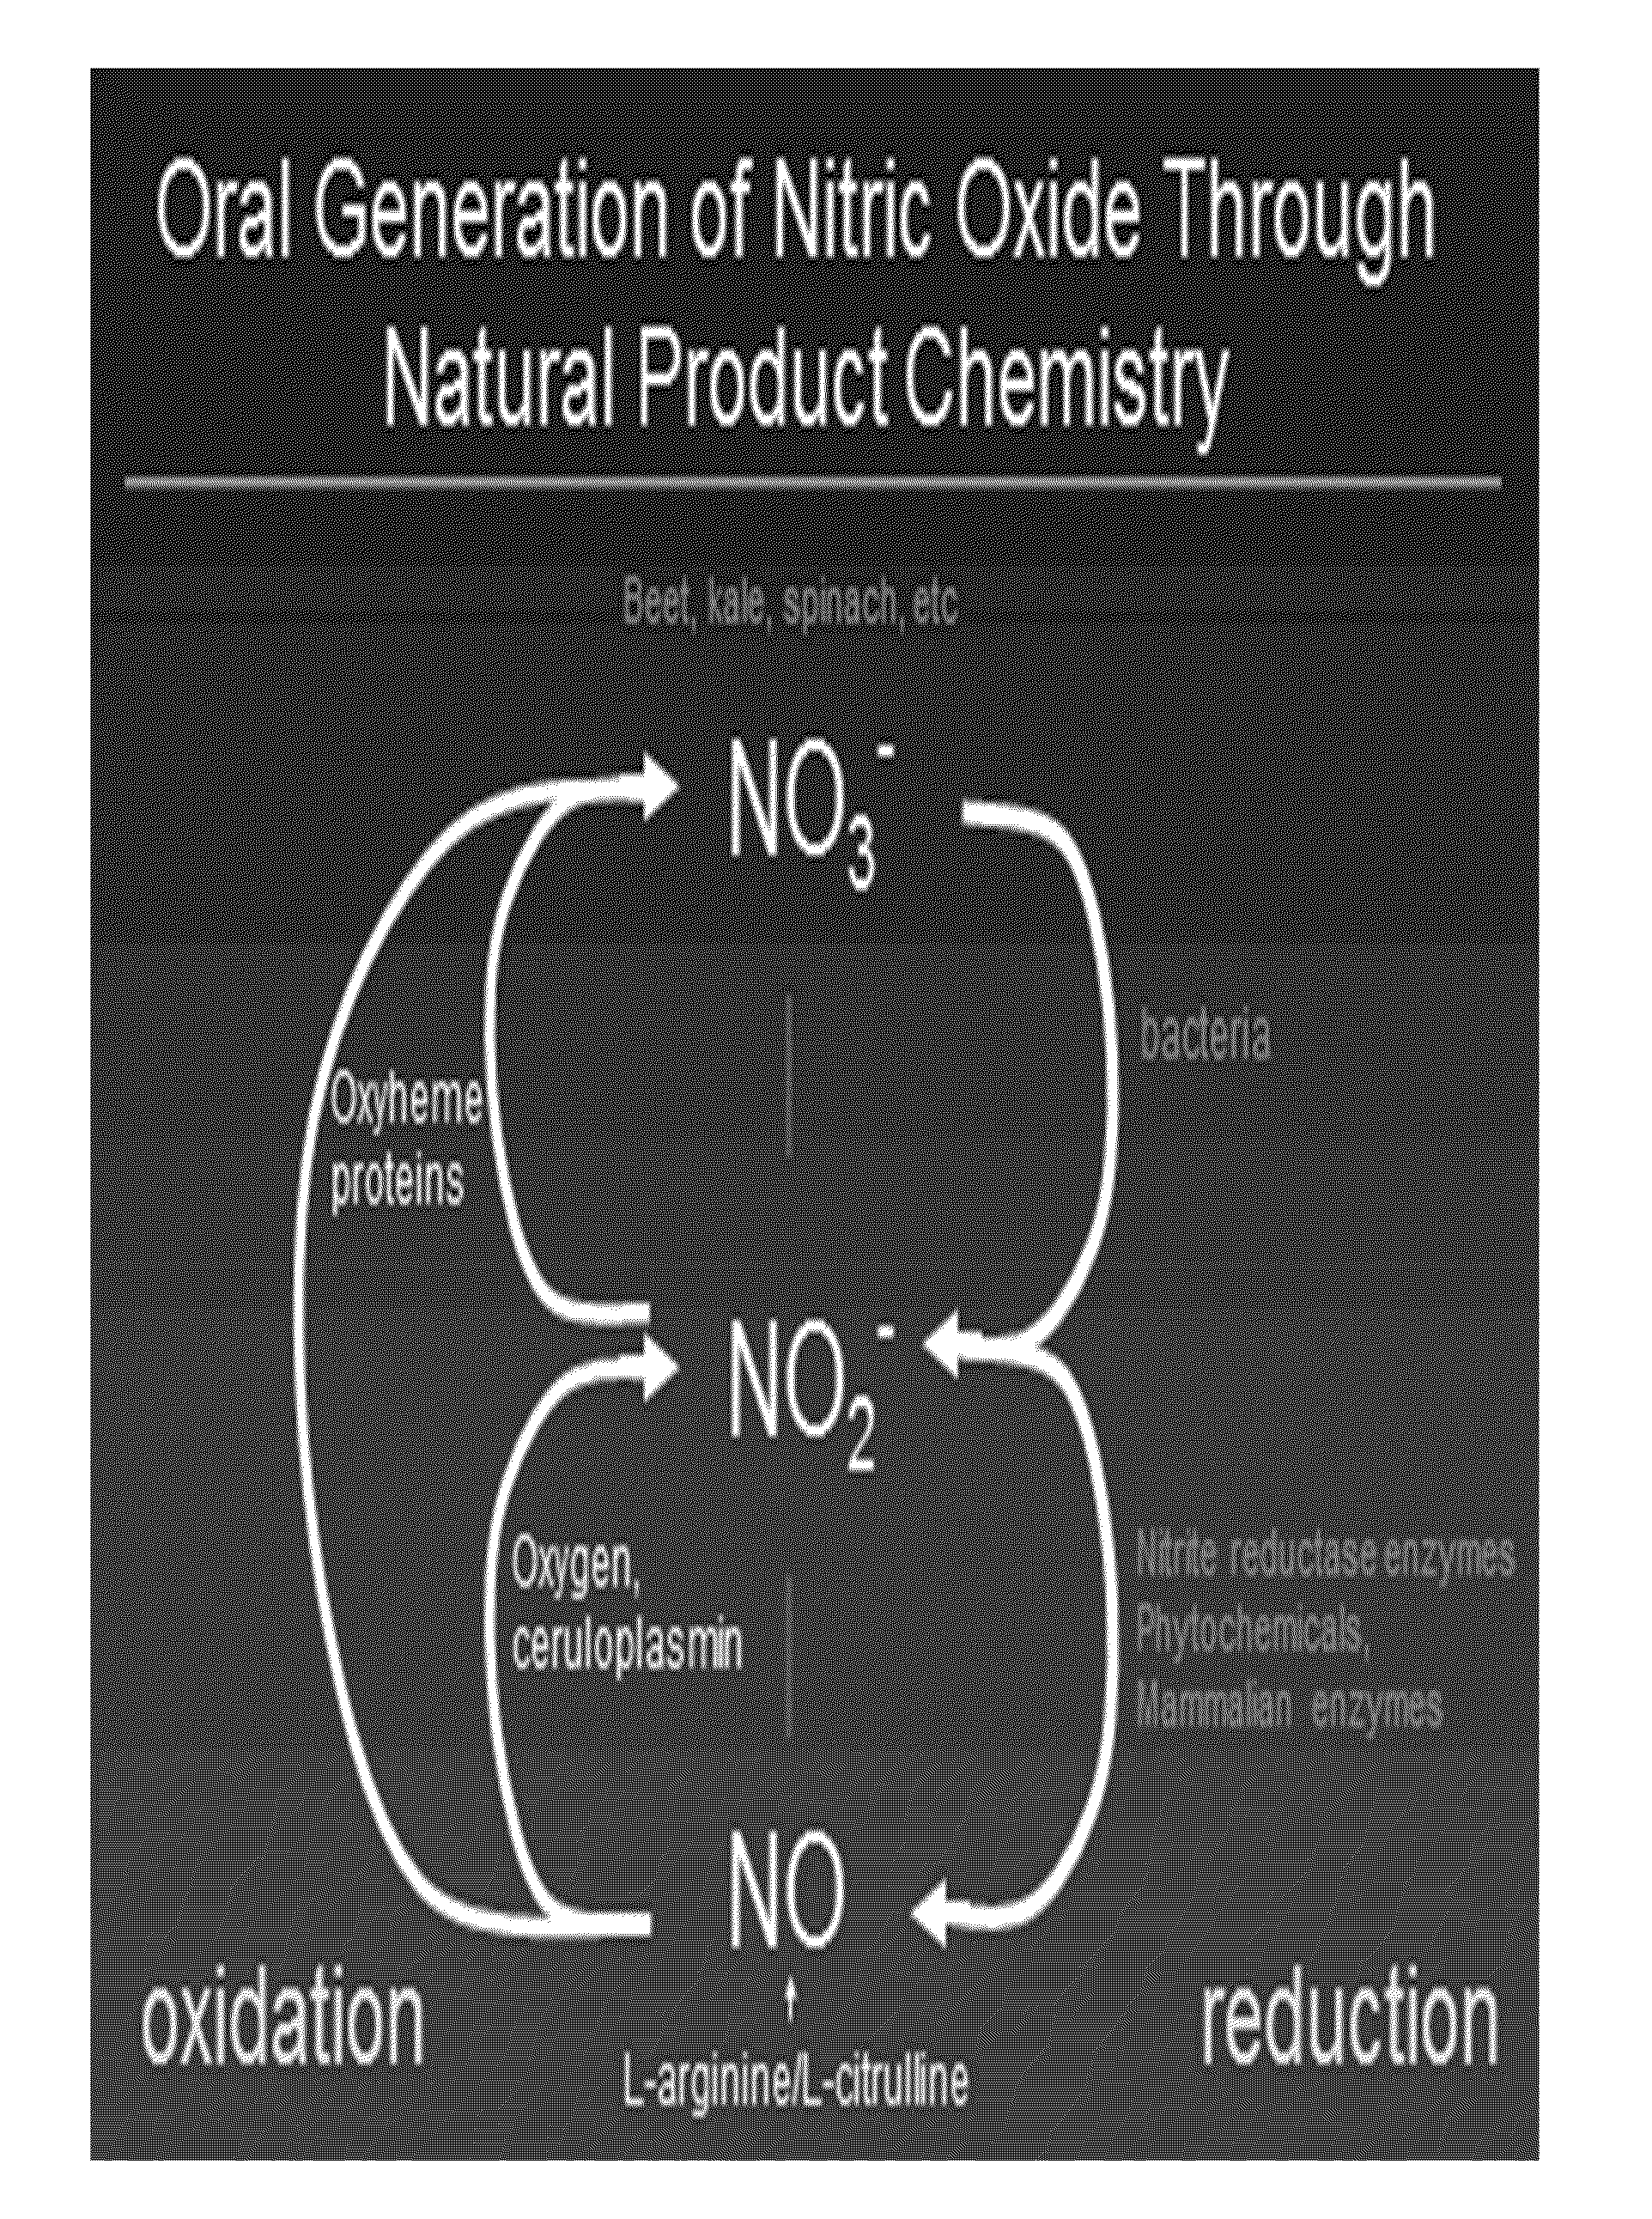 Method of producing physiological and therapeutic levels of nitric oxide through an oral delivery system